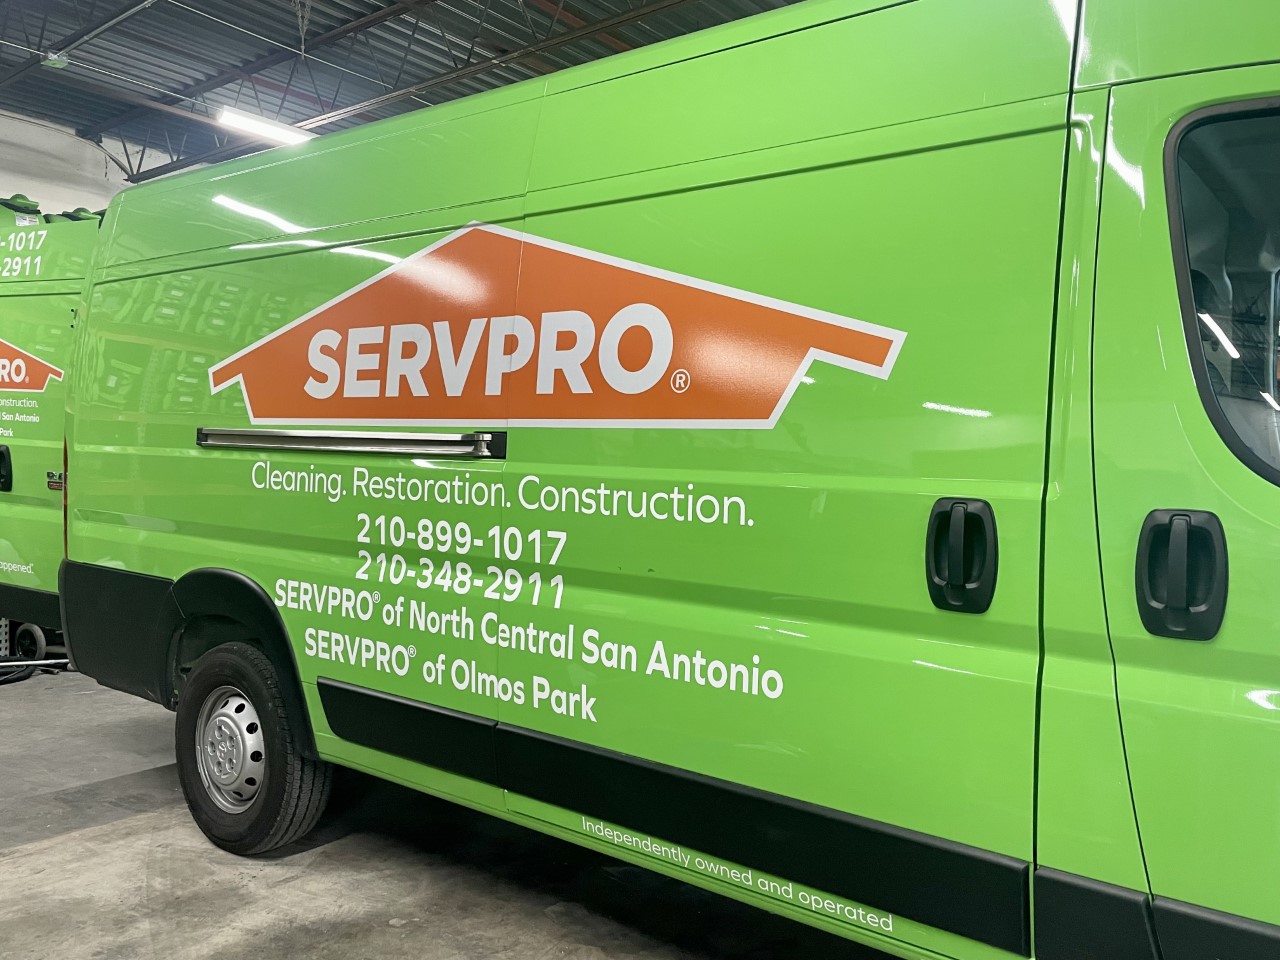 SERVPRO is ready 24/7. Our fleet vehicles are always loaded and ready to respond to action.